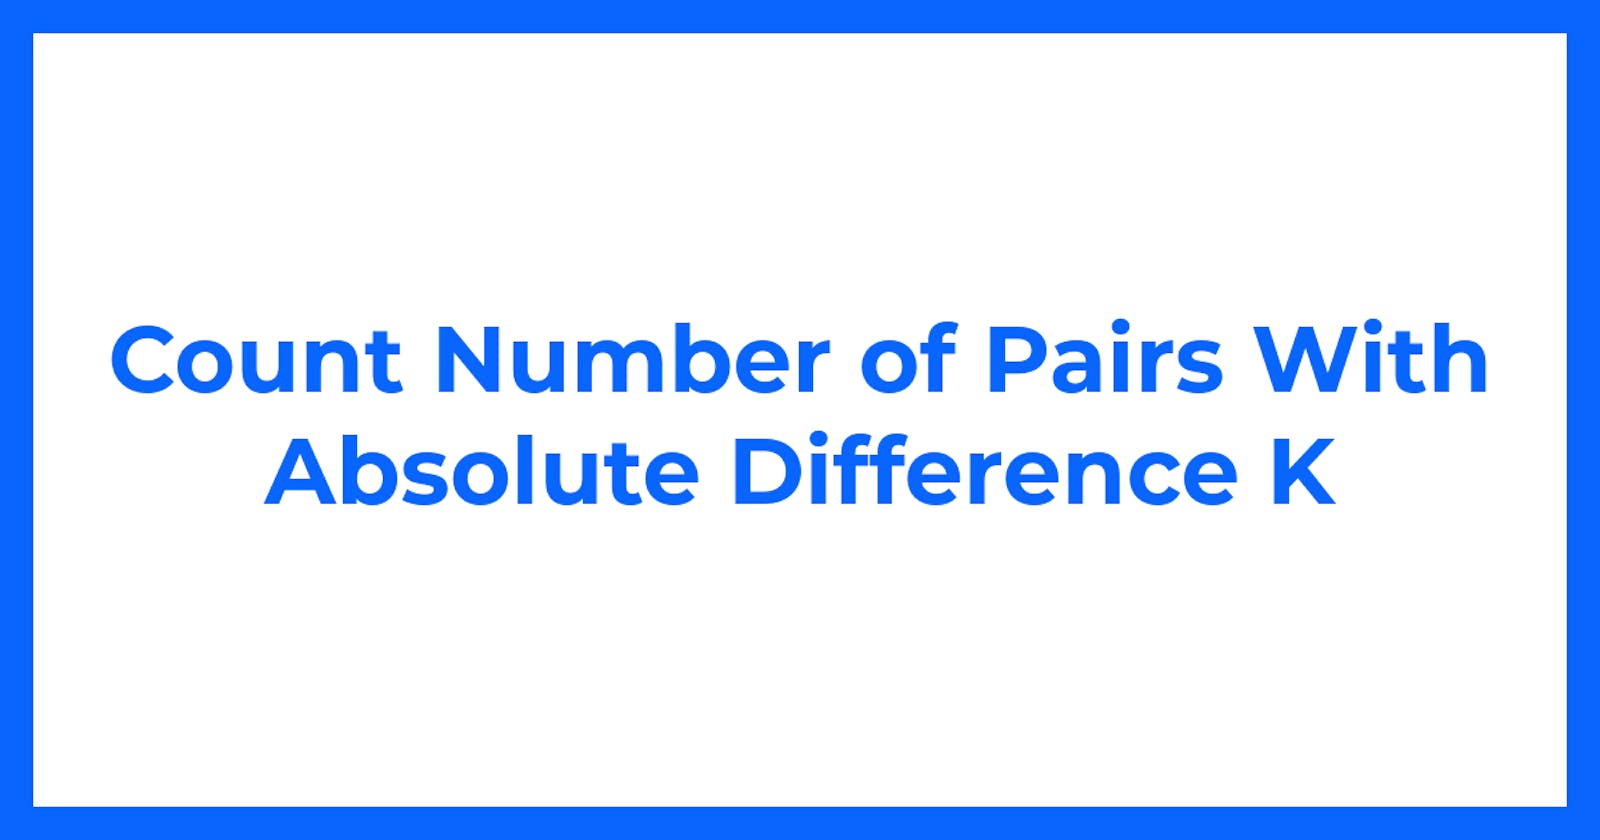 Count Number of Pairs With Absolute Difference K